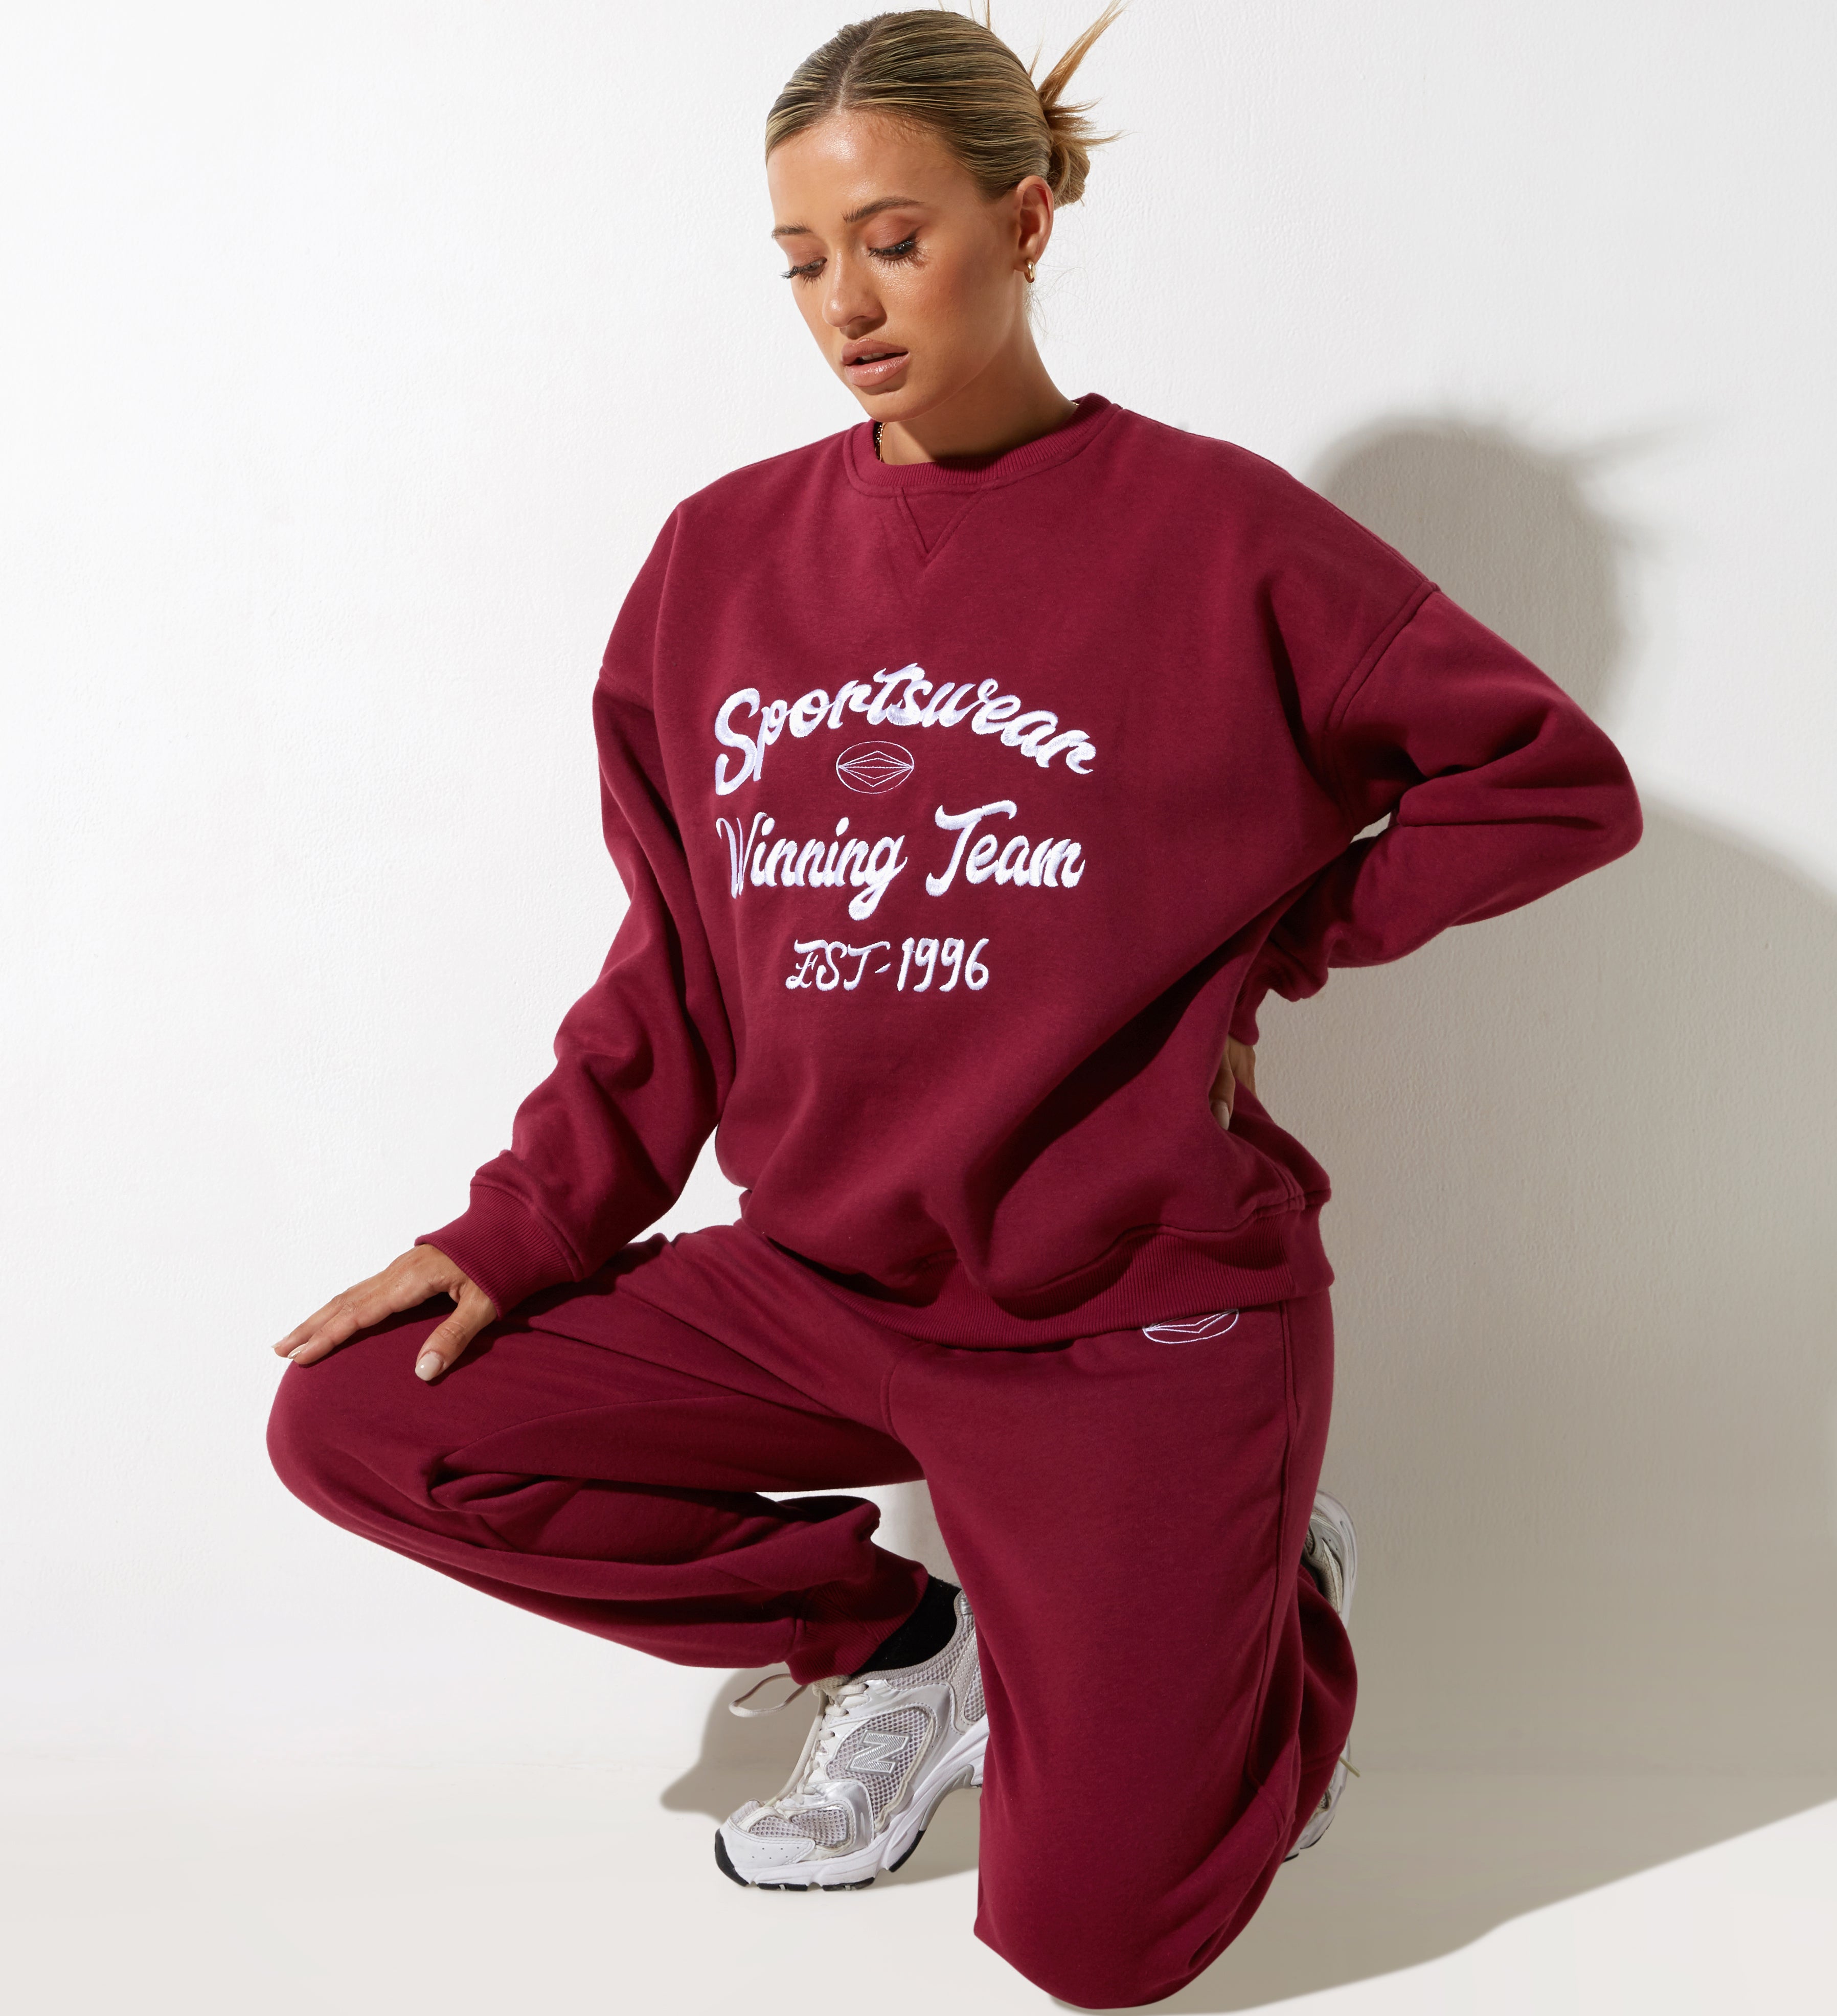 image of Roider Jogger in Burgundy with "Winning Team" Embro